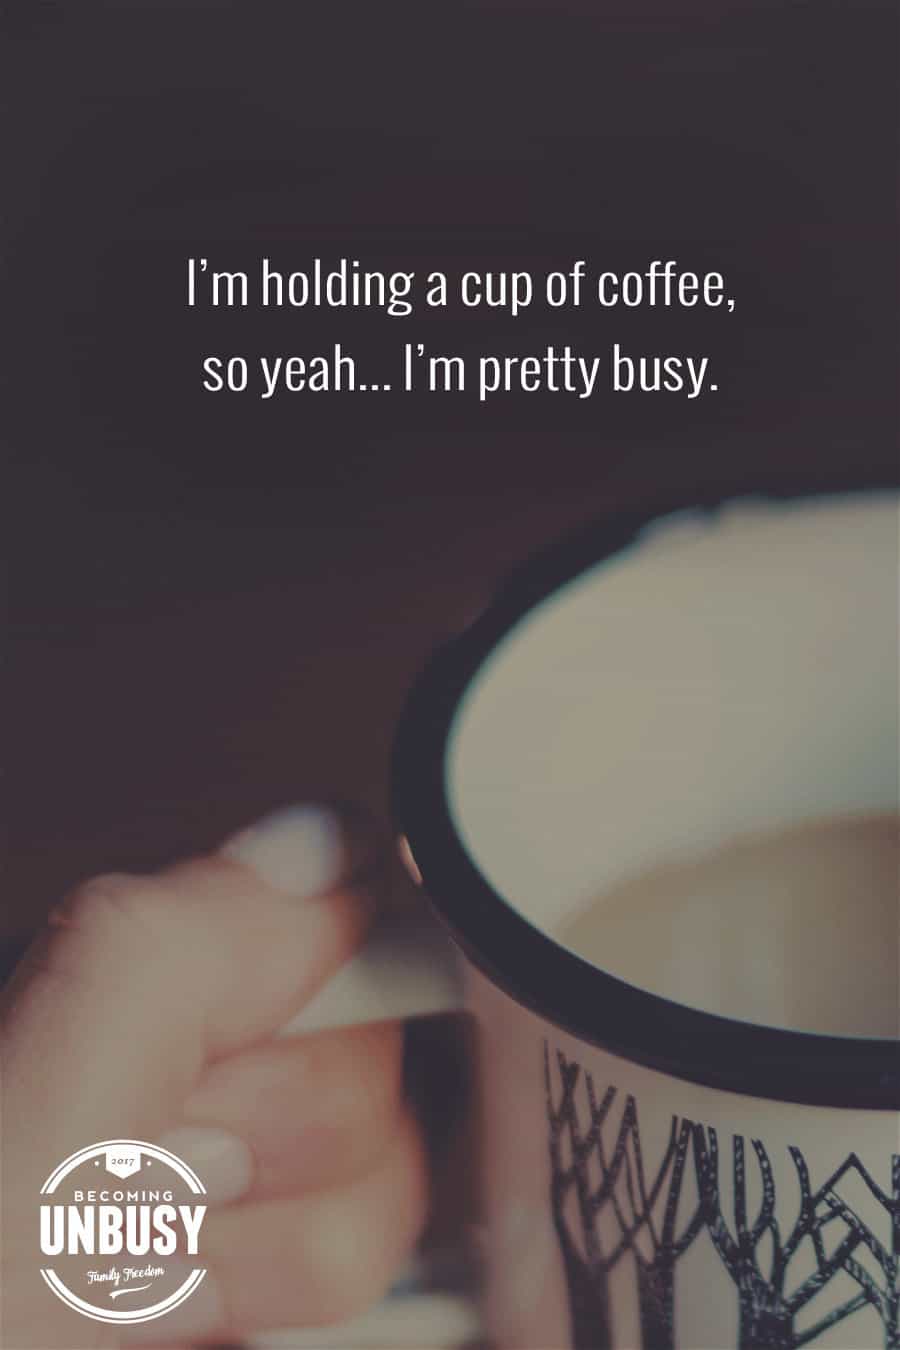 The following winter self-care quote over a photo of a woman holding a cup of hot coffee, "I'm holding a cup of coffee, so yeah... I'm pretty busy."